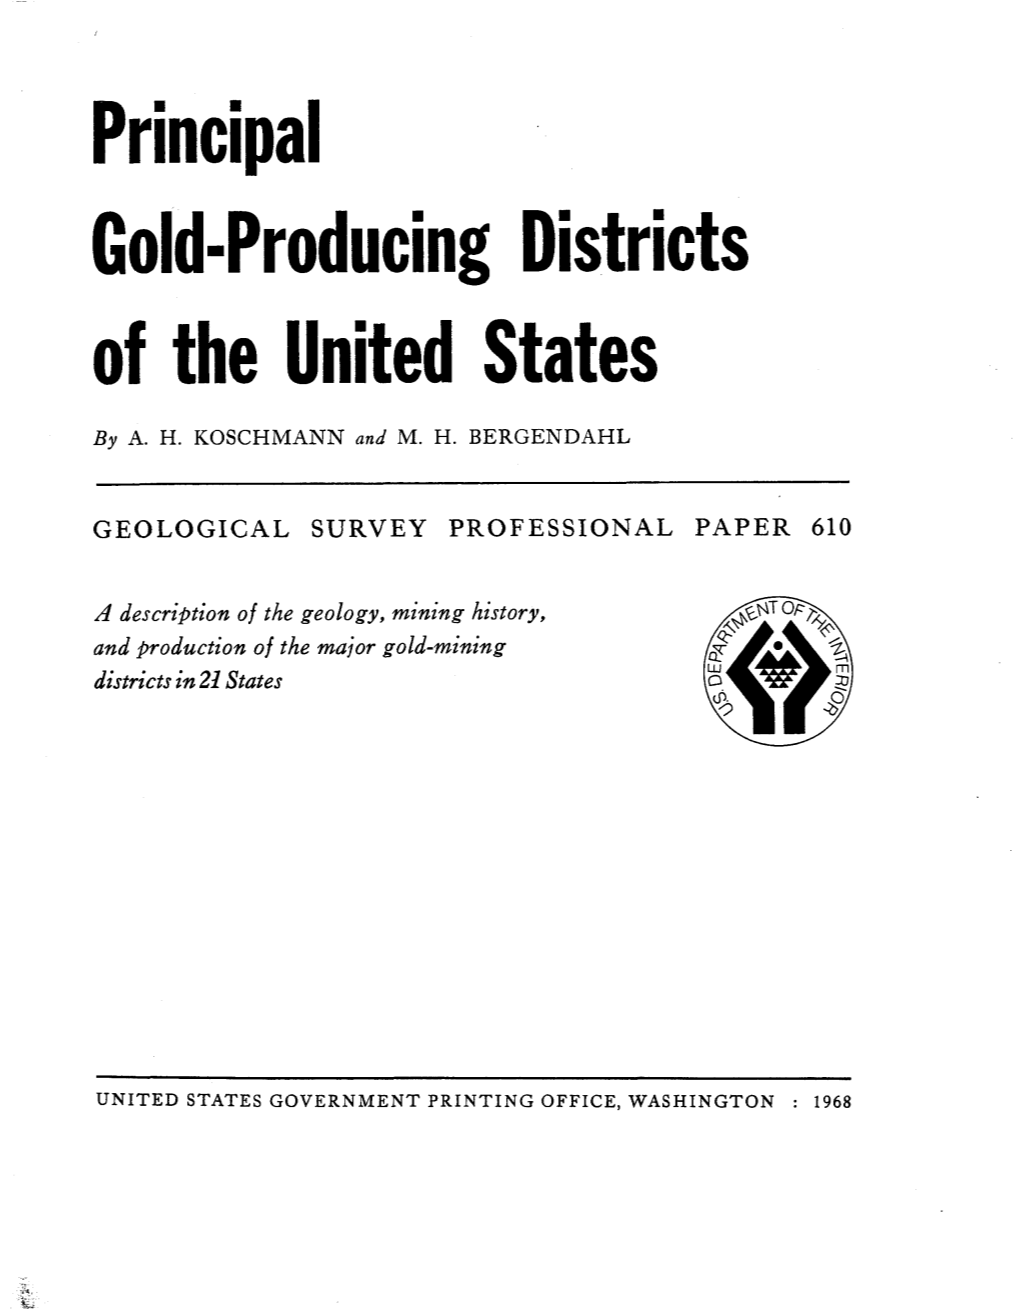 Gold-Producing Districts of the United States